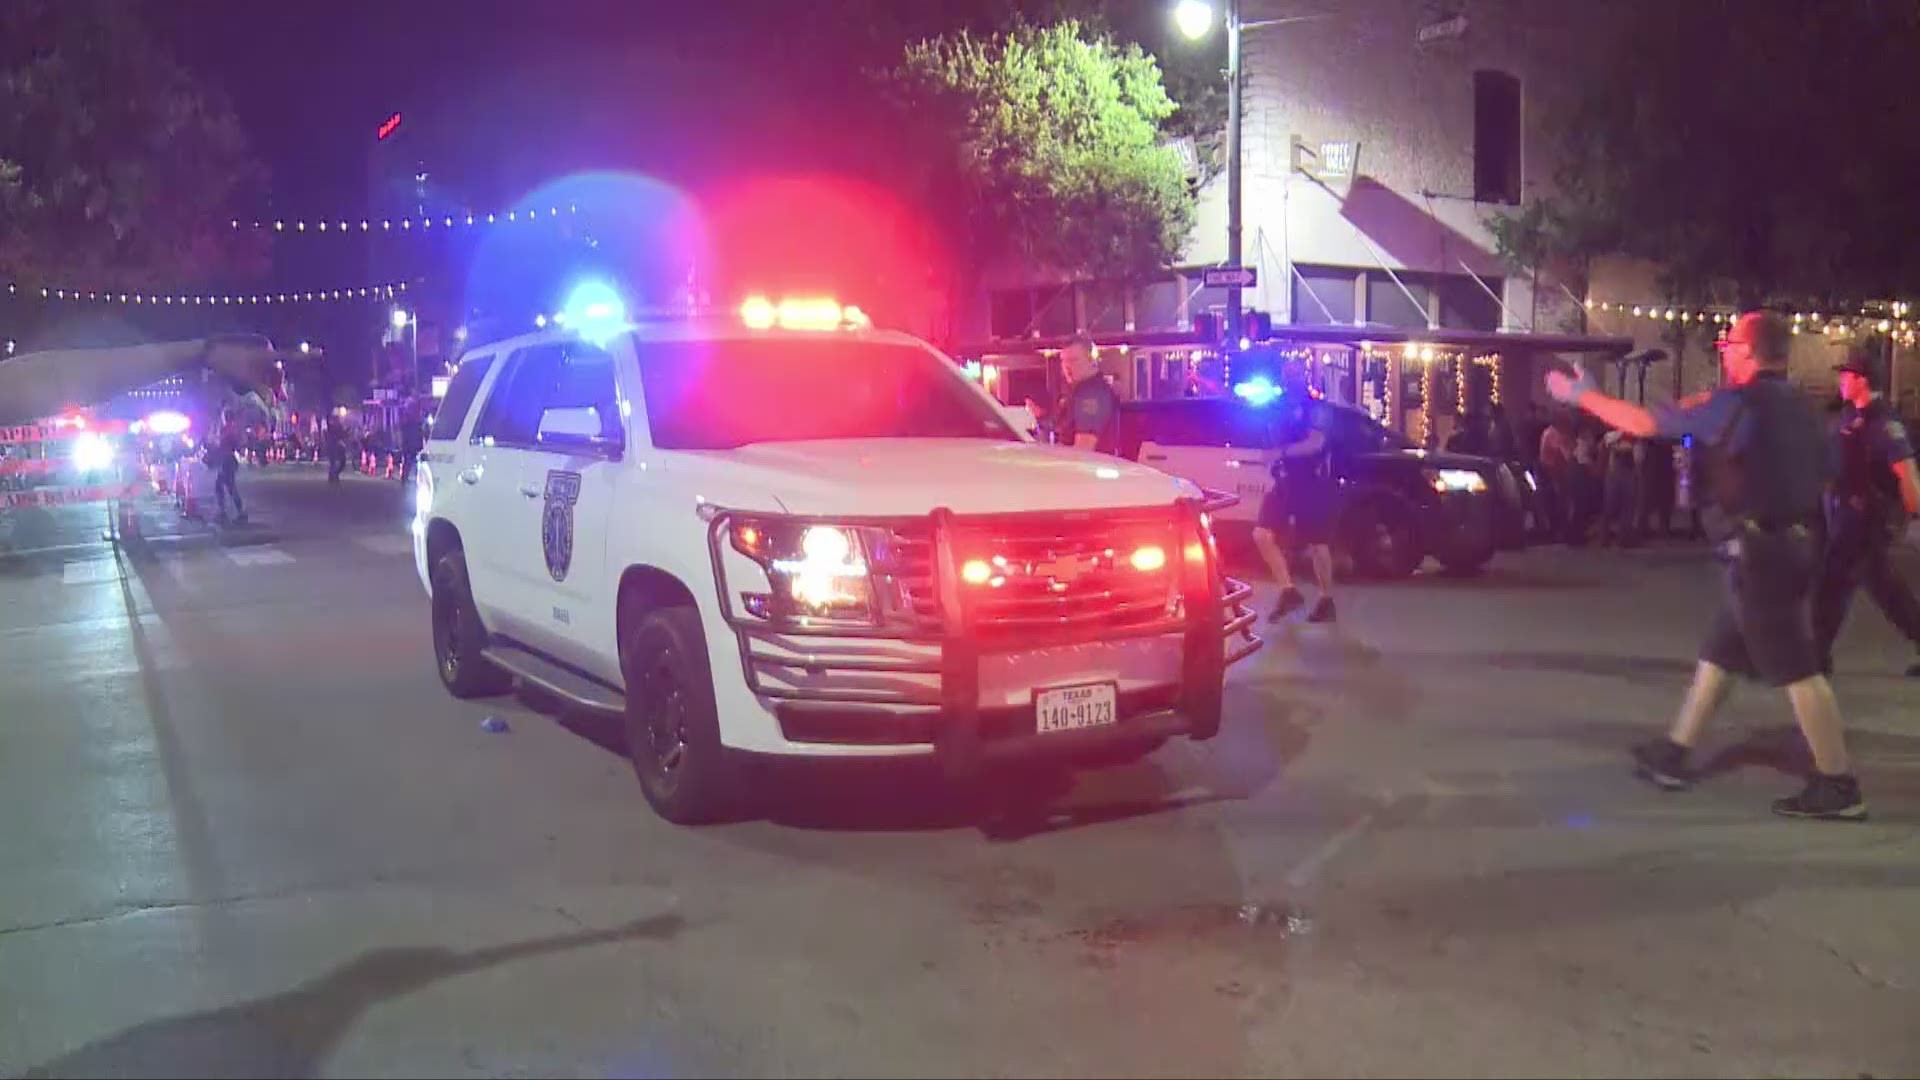 Video from Metro Video Services shows a chaotic scene in the busy entertainment district on 6th Street.